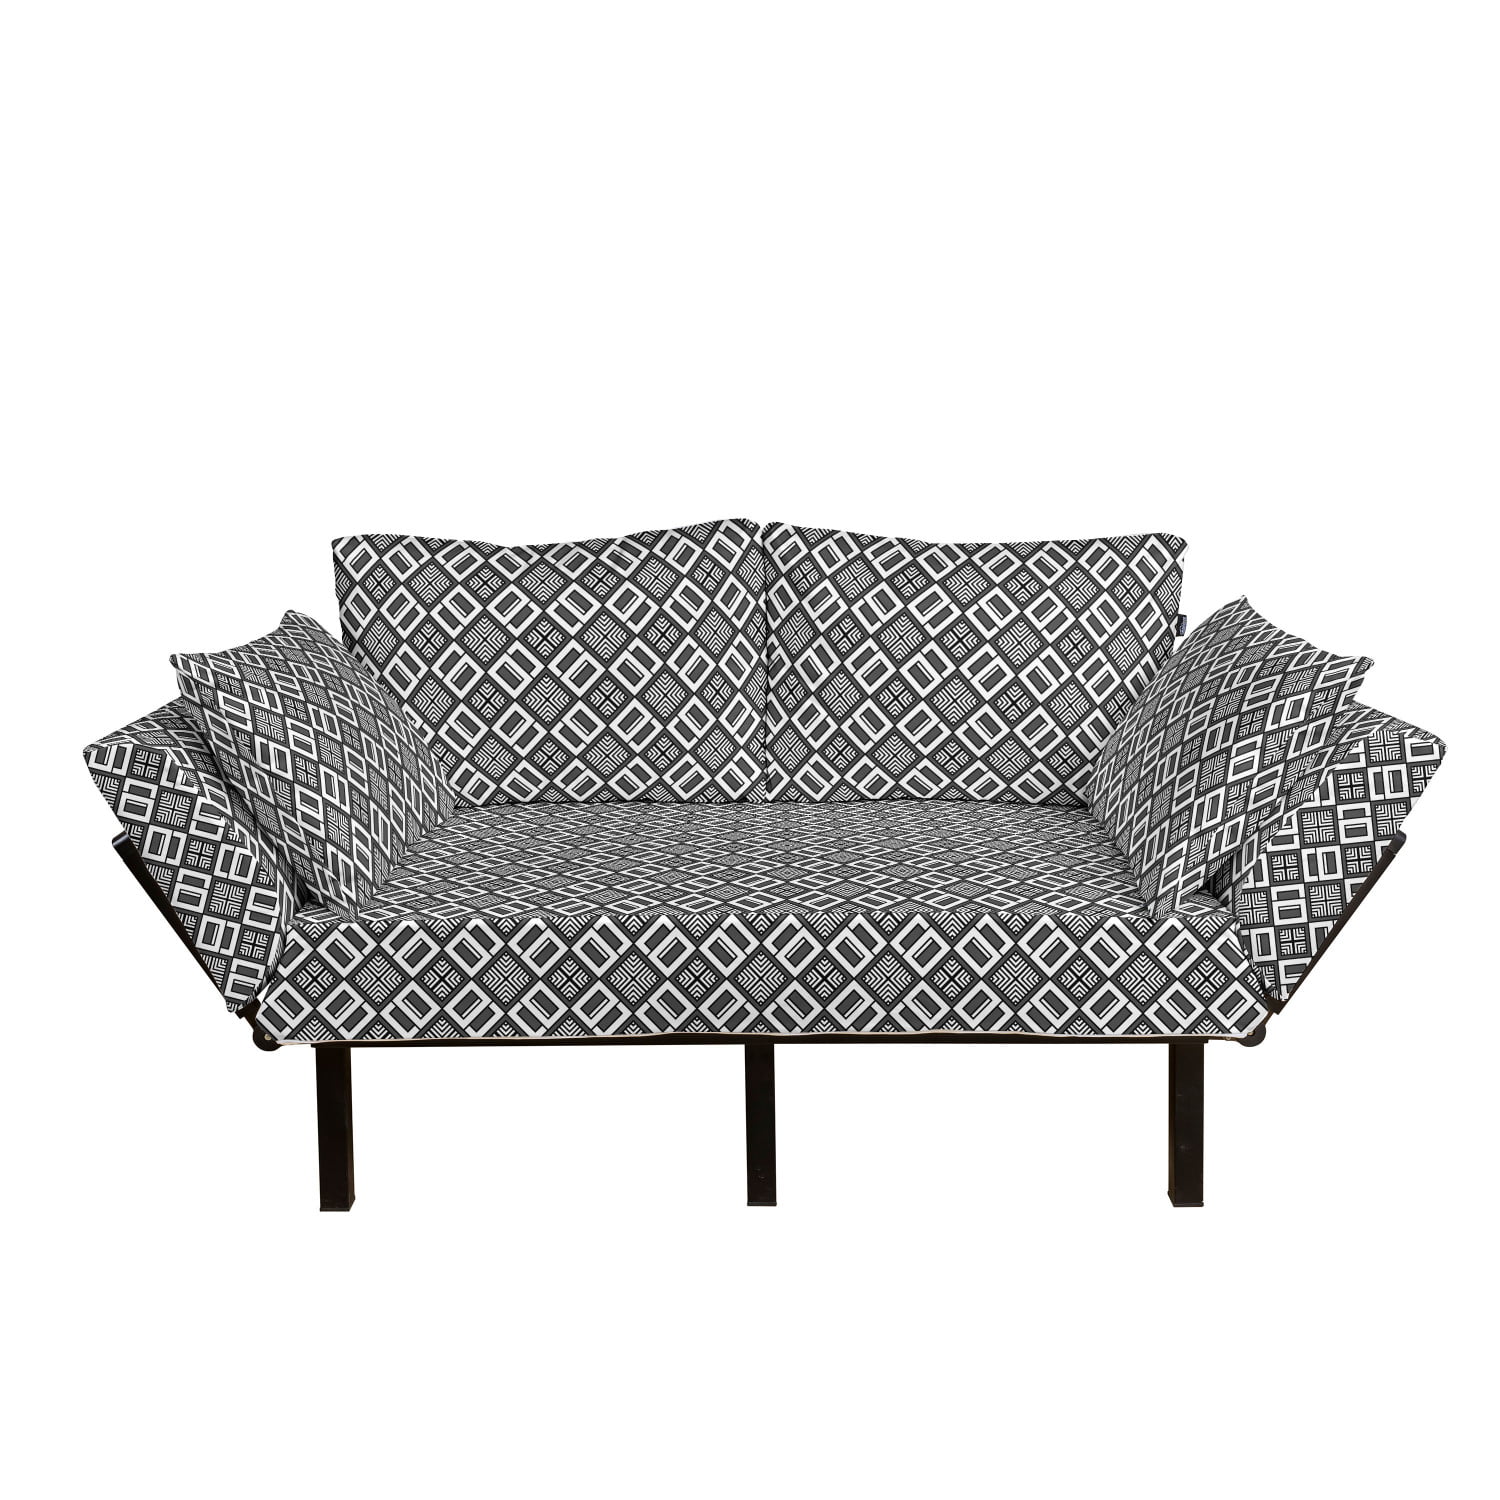 Loveseat Ambesonne Bananas Futon Couch Daybed with Metal Frame Upholstered Sofa for Living Dorm Mustard Charcoal Grey Hand Drawn Doodle Style Peeled Banana and Heart Motifs Fruity